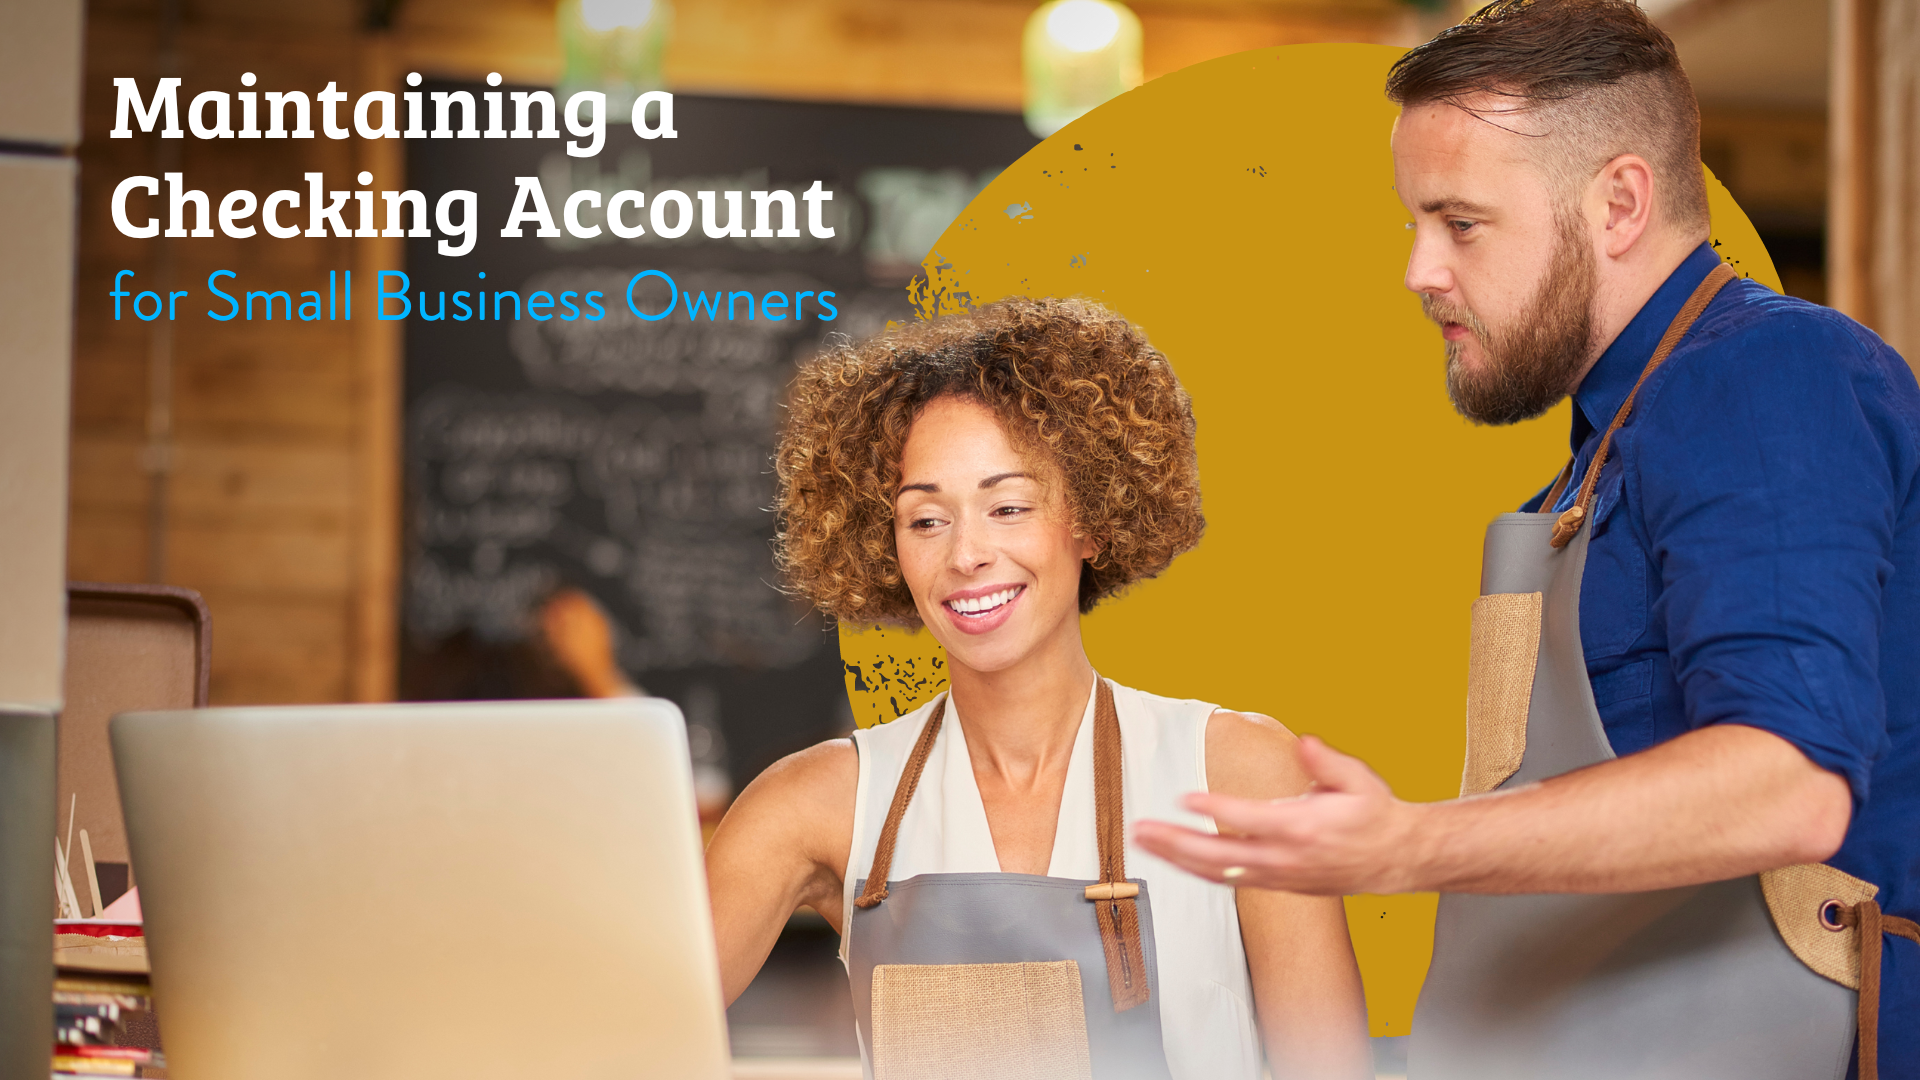 Small Business Owner Guide: Maintaining A Checking Account